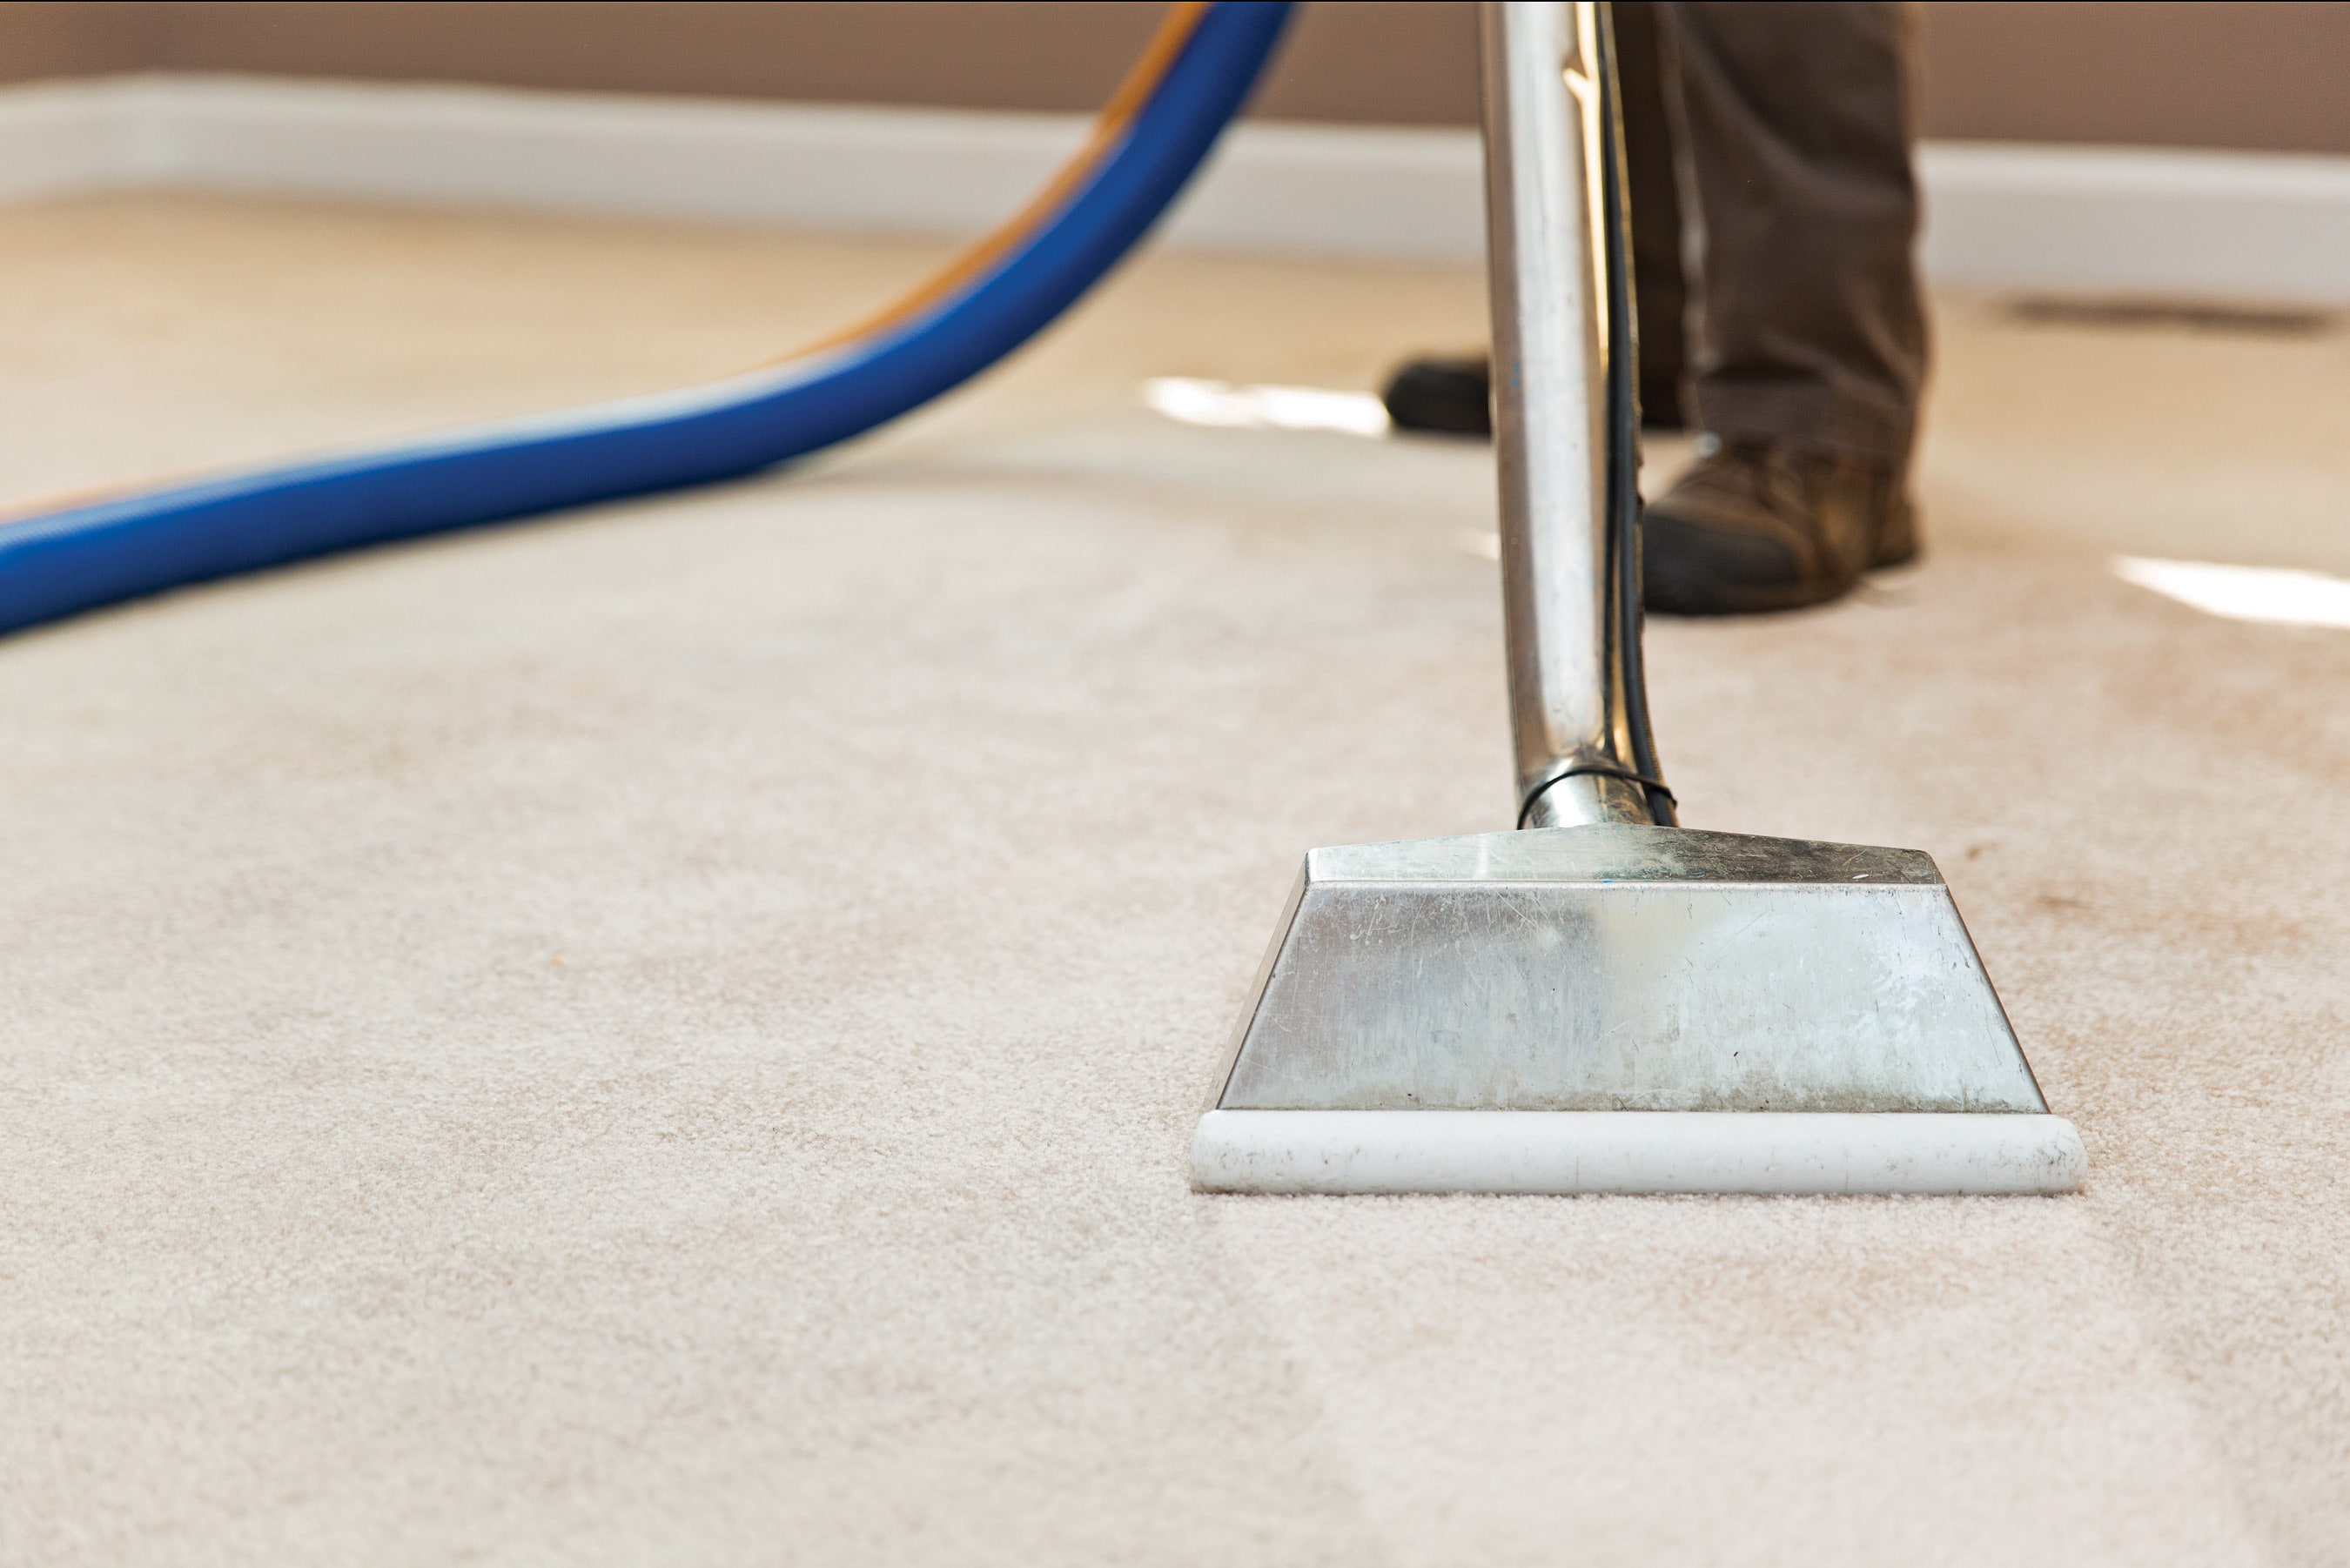 Hot Water Extraction vs Bonnet Carpet Cleaning